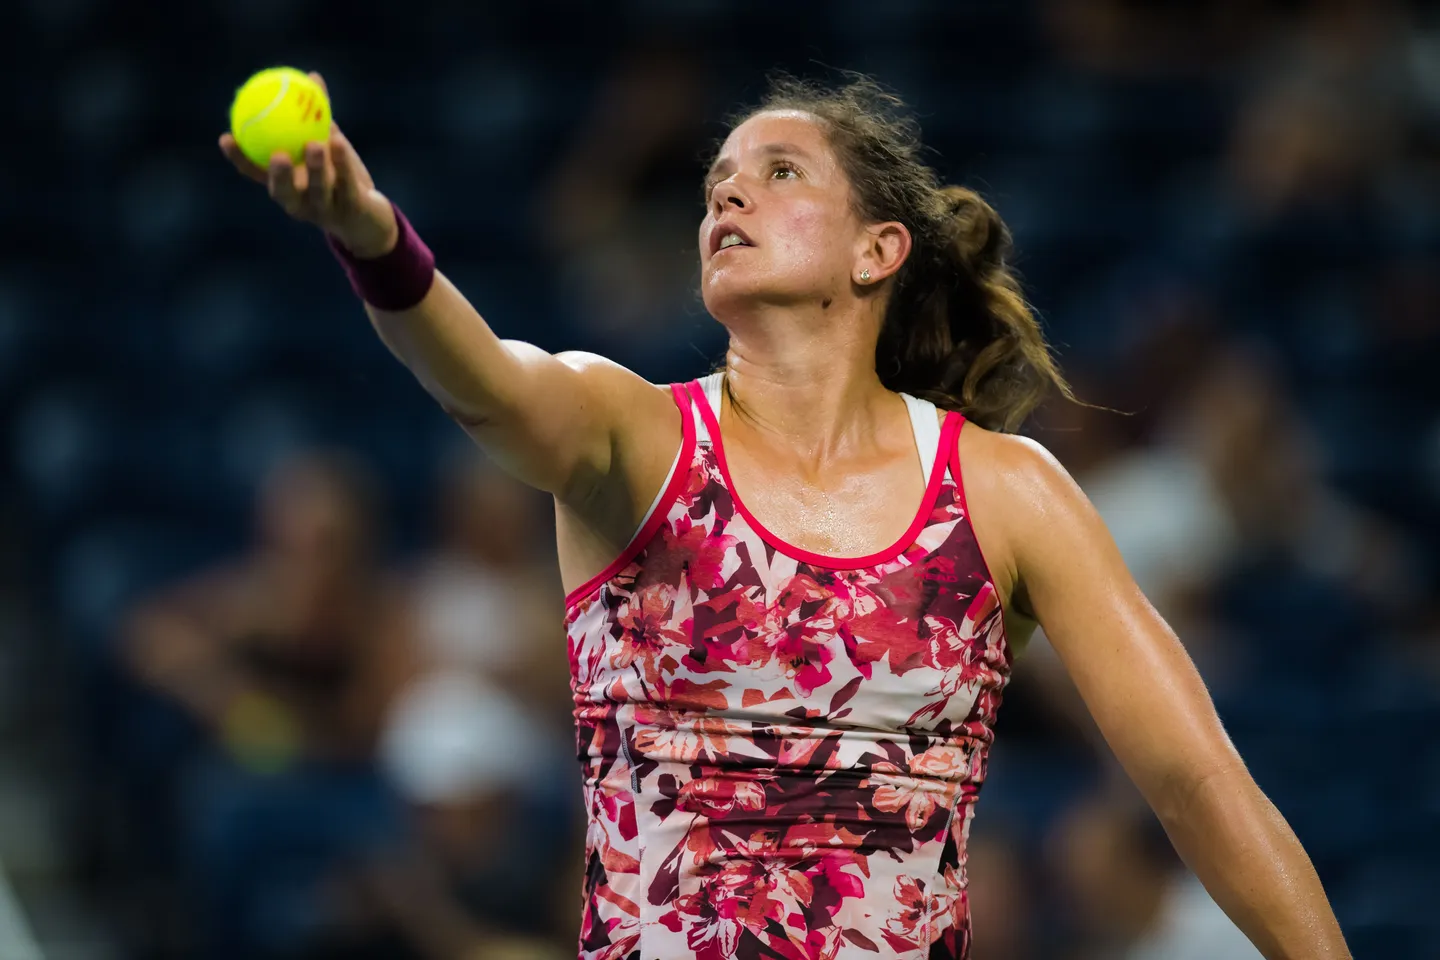 Patty Schnyder - Seventh Greatest Swiss Tennis Players Of All Time